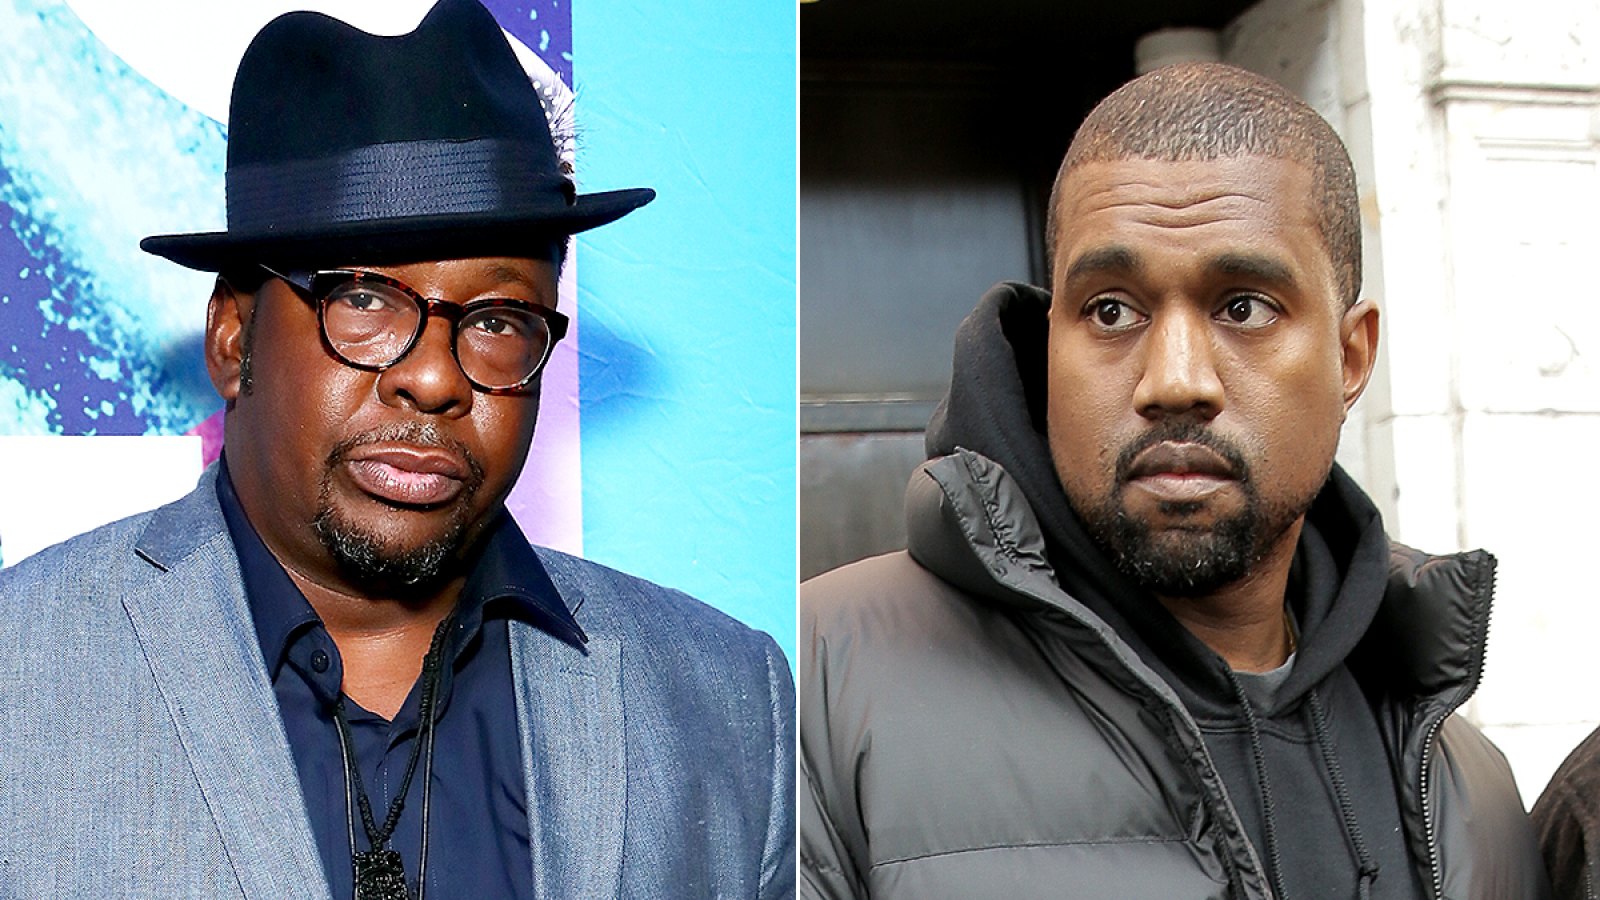 Bobby Brown and Kanye West